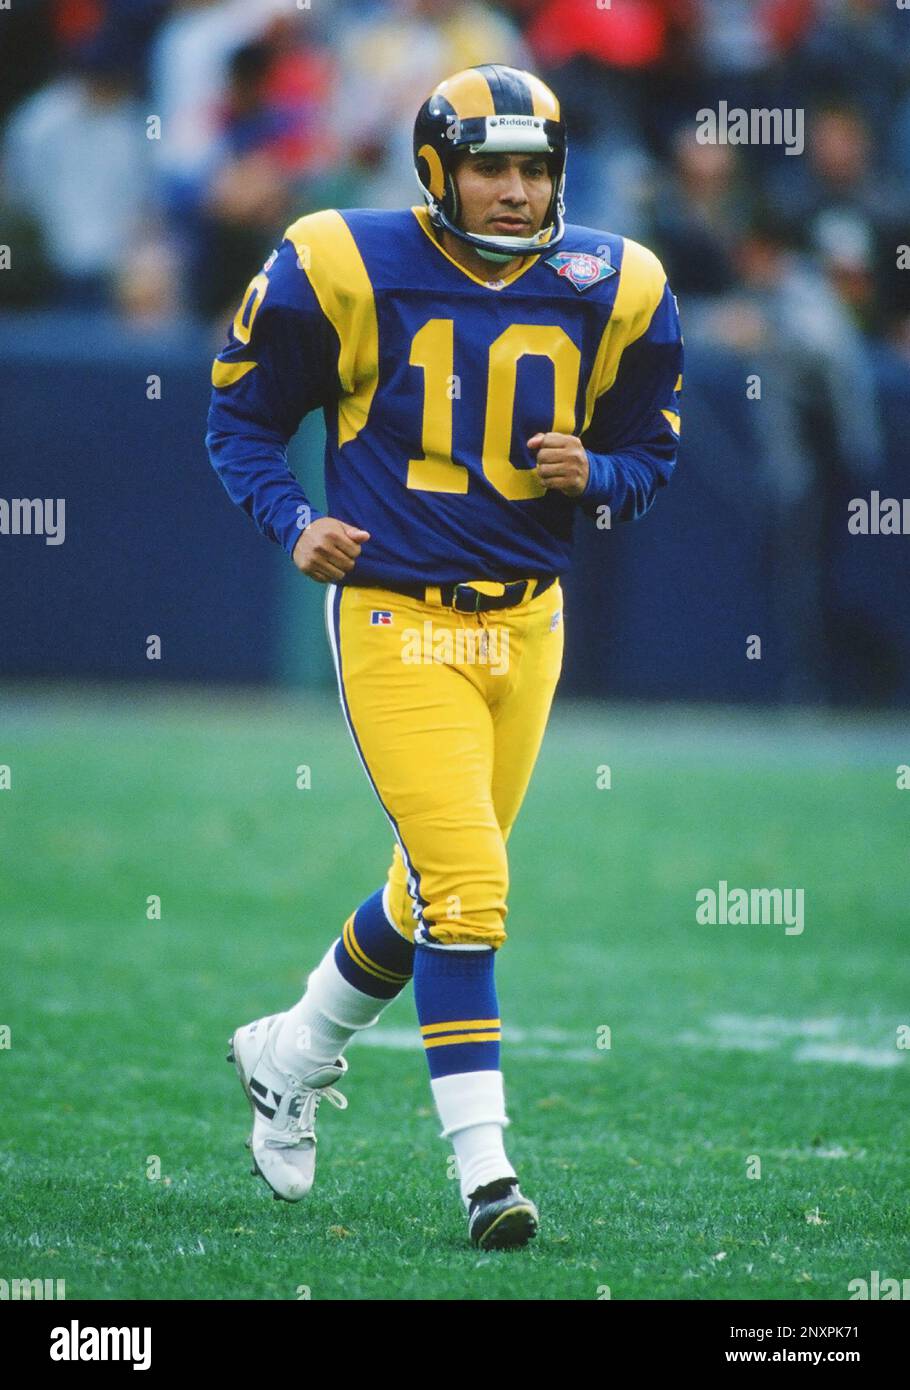 24 Dec. 1994: Los Angeles Rams kicker Tony Zendejas (10) on the field  during a game against the Washington Redskins played at Anaheim Stadium in  Anaheim, CA.. (Photo By John Cordes/Icon Sportswire) (